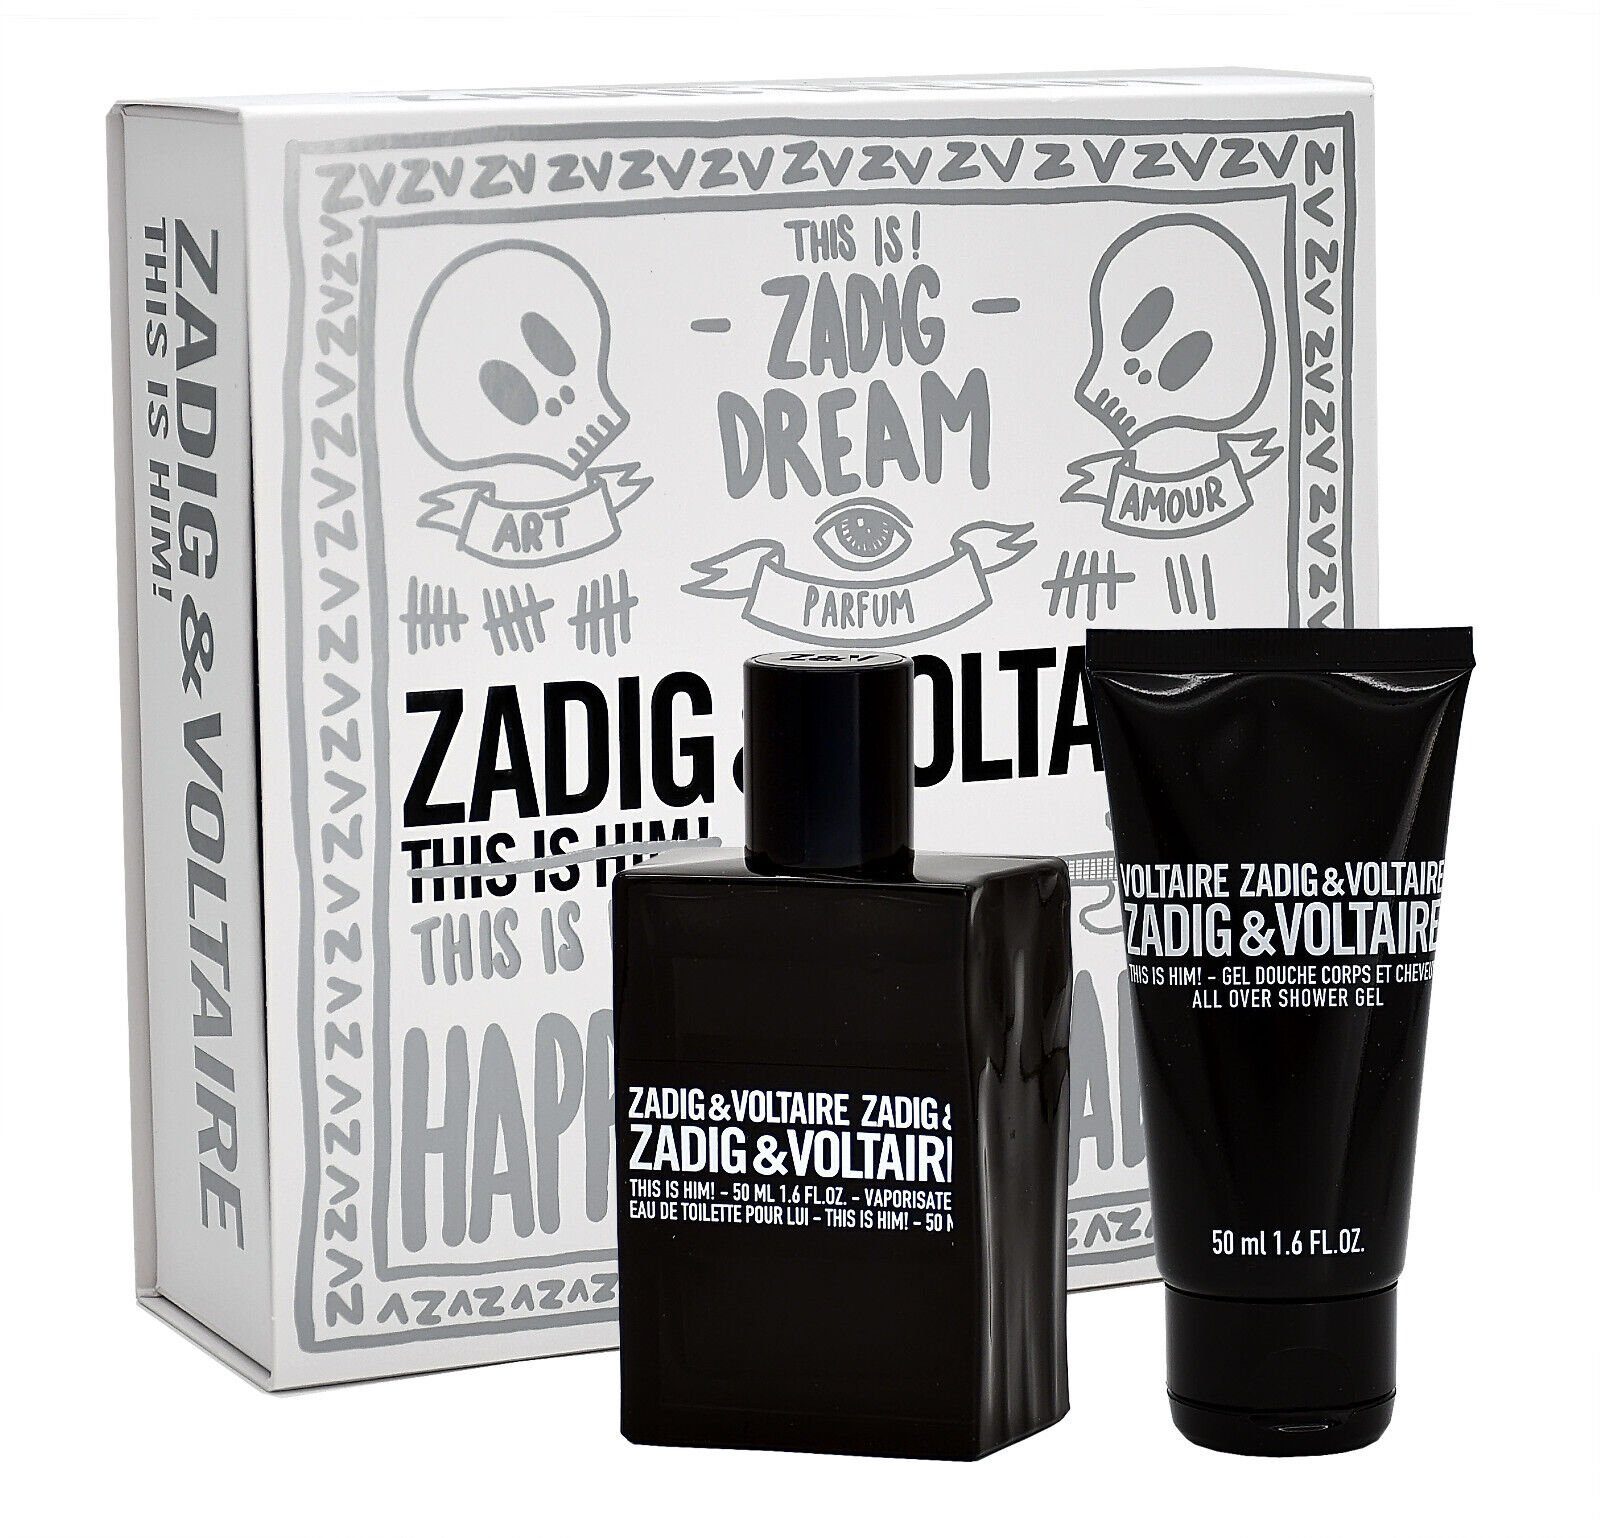 SG THIS ZADIG + 50ML IS VOLTAIRE & 50ML ZADIG Duft-Set & EDT HIM VOLTAIRE